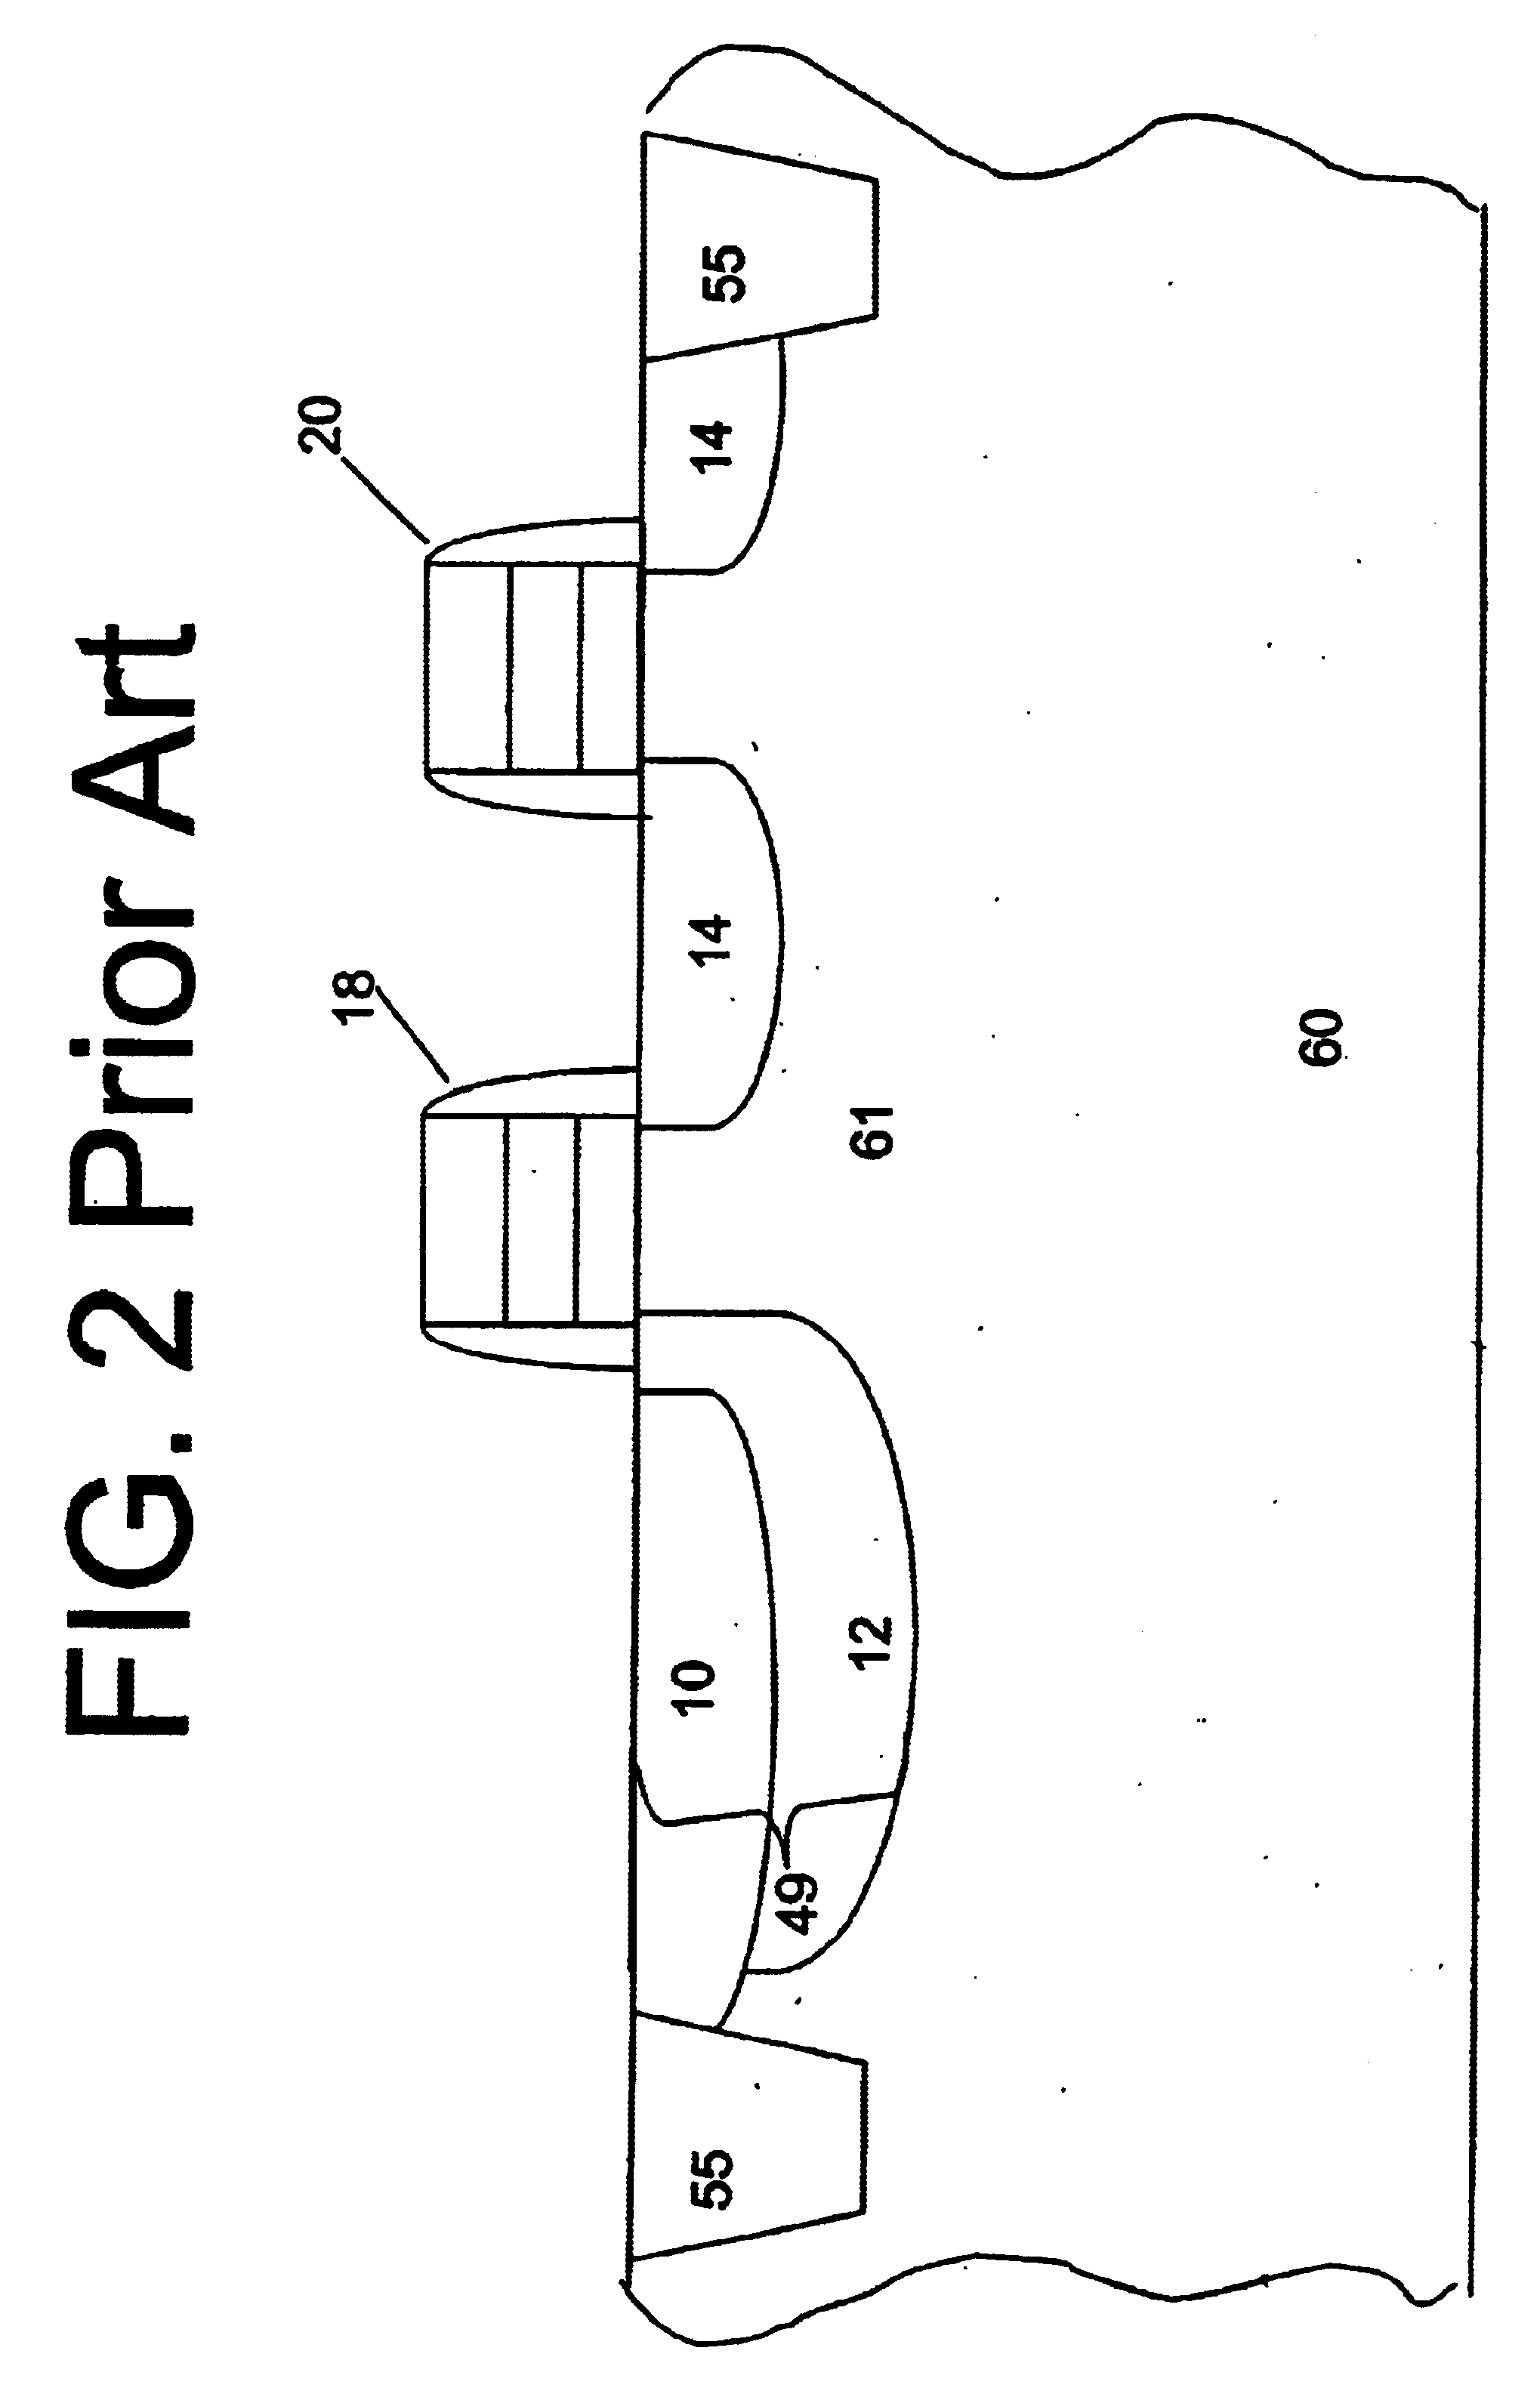 Elevated photodiode in an image sensor